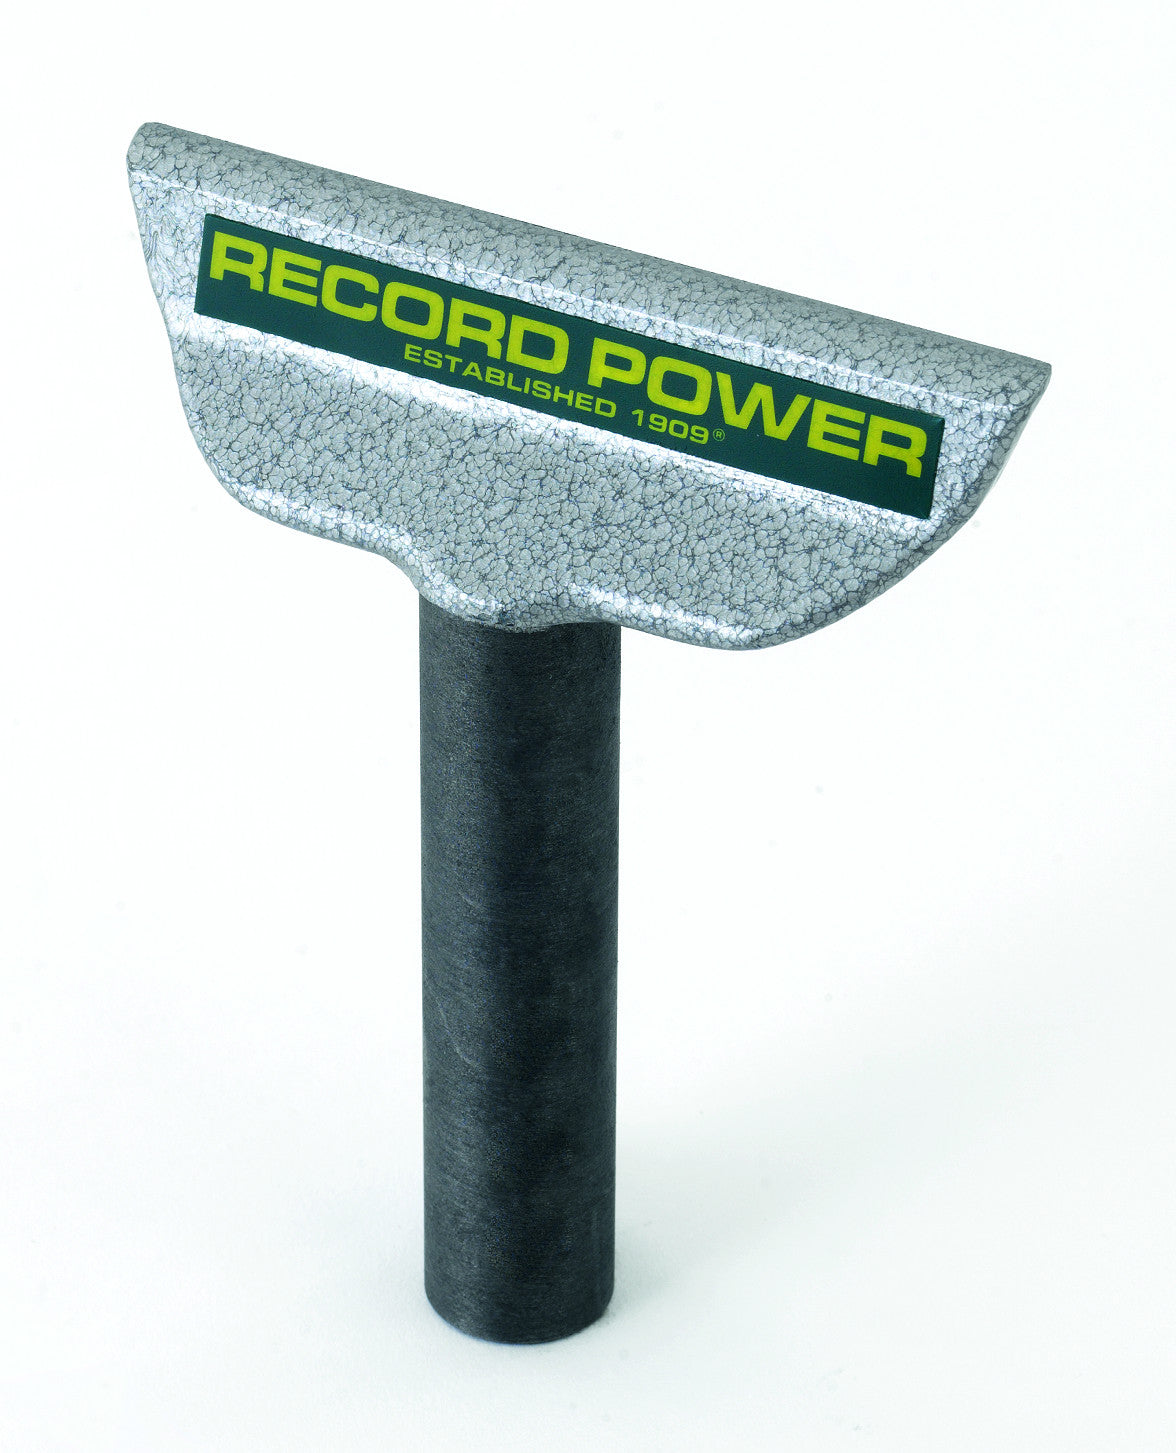 Record Power 5 inch tool rest